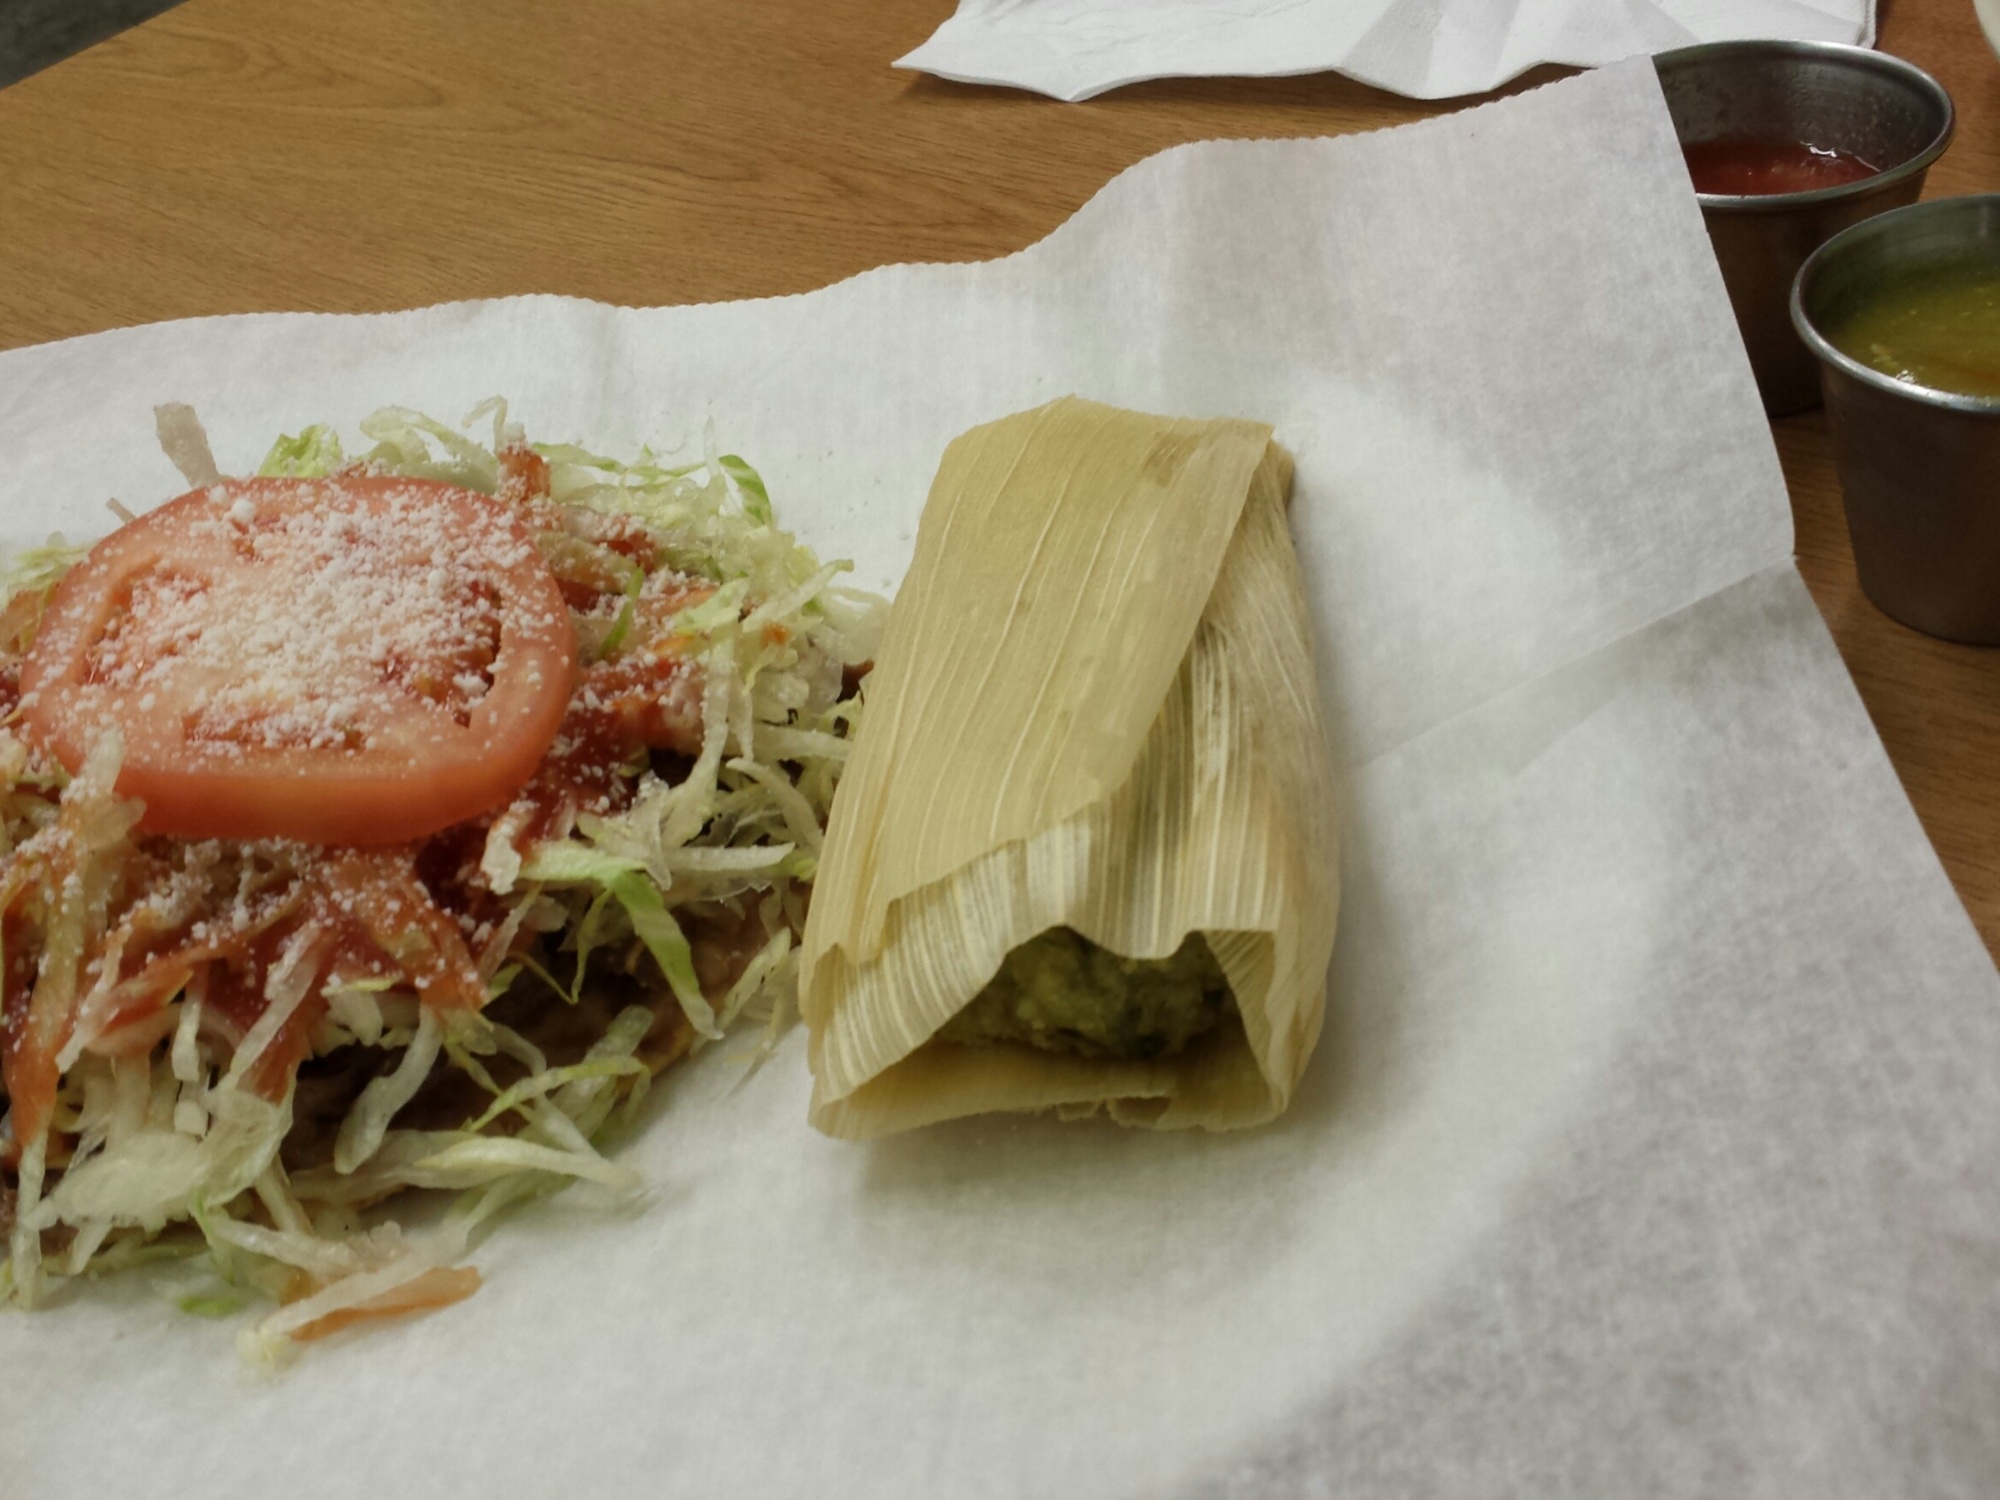 des moines tamales, merle hay mall, food court, des moines